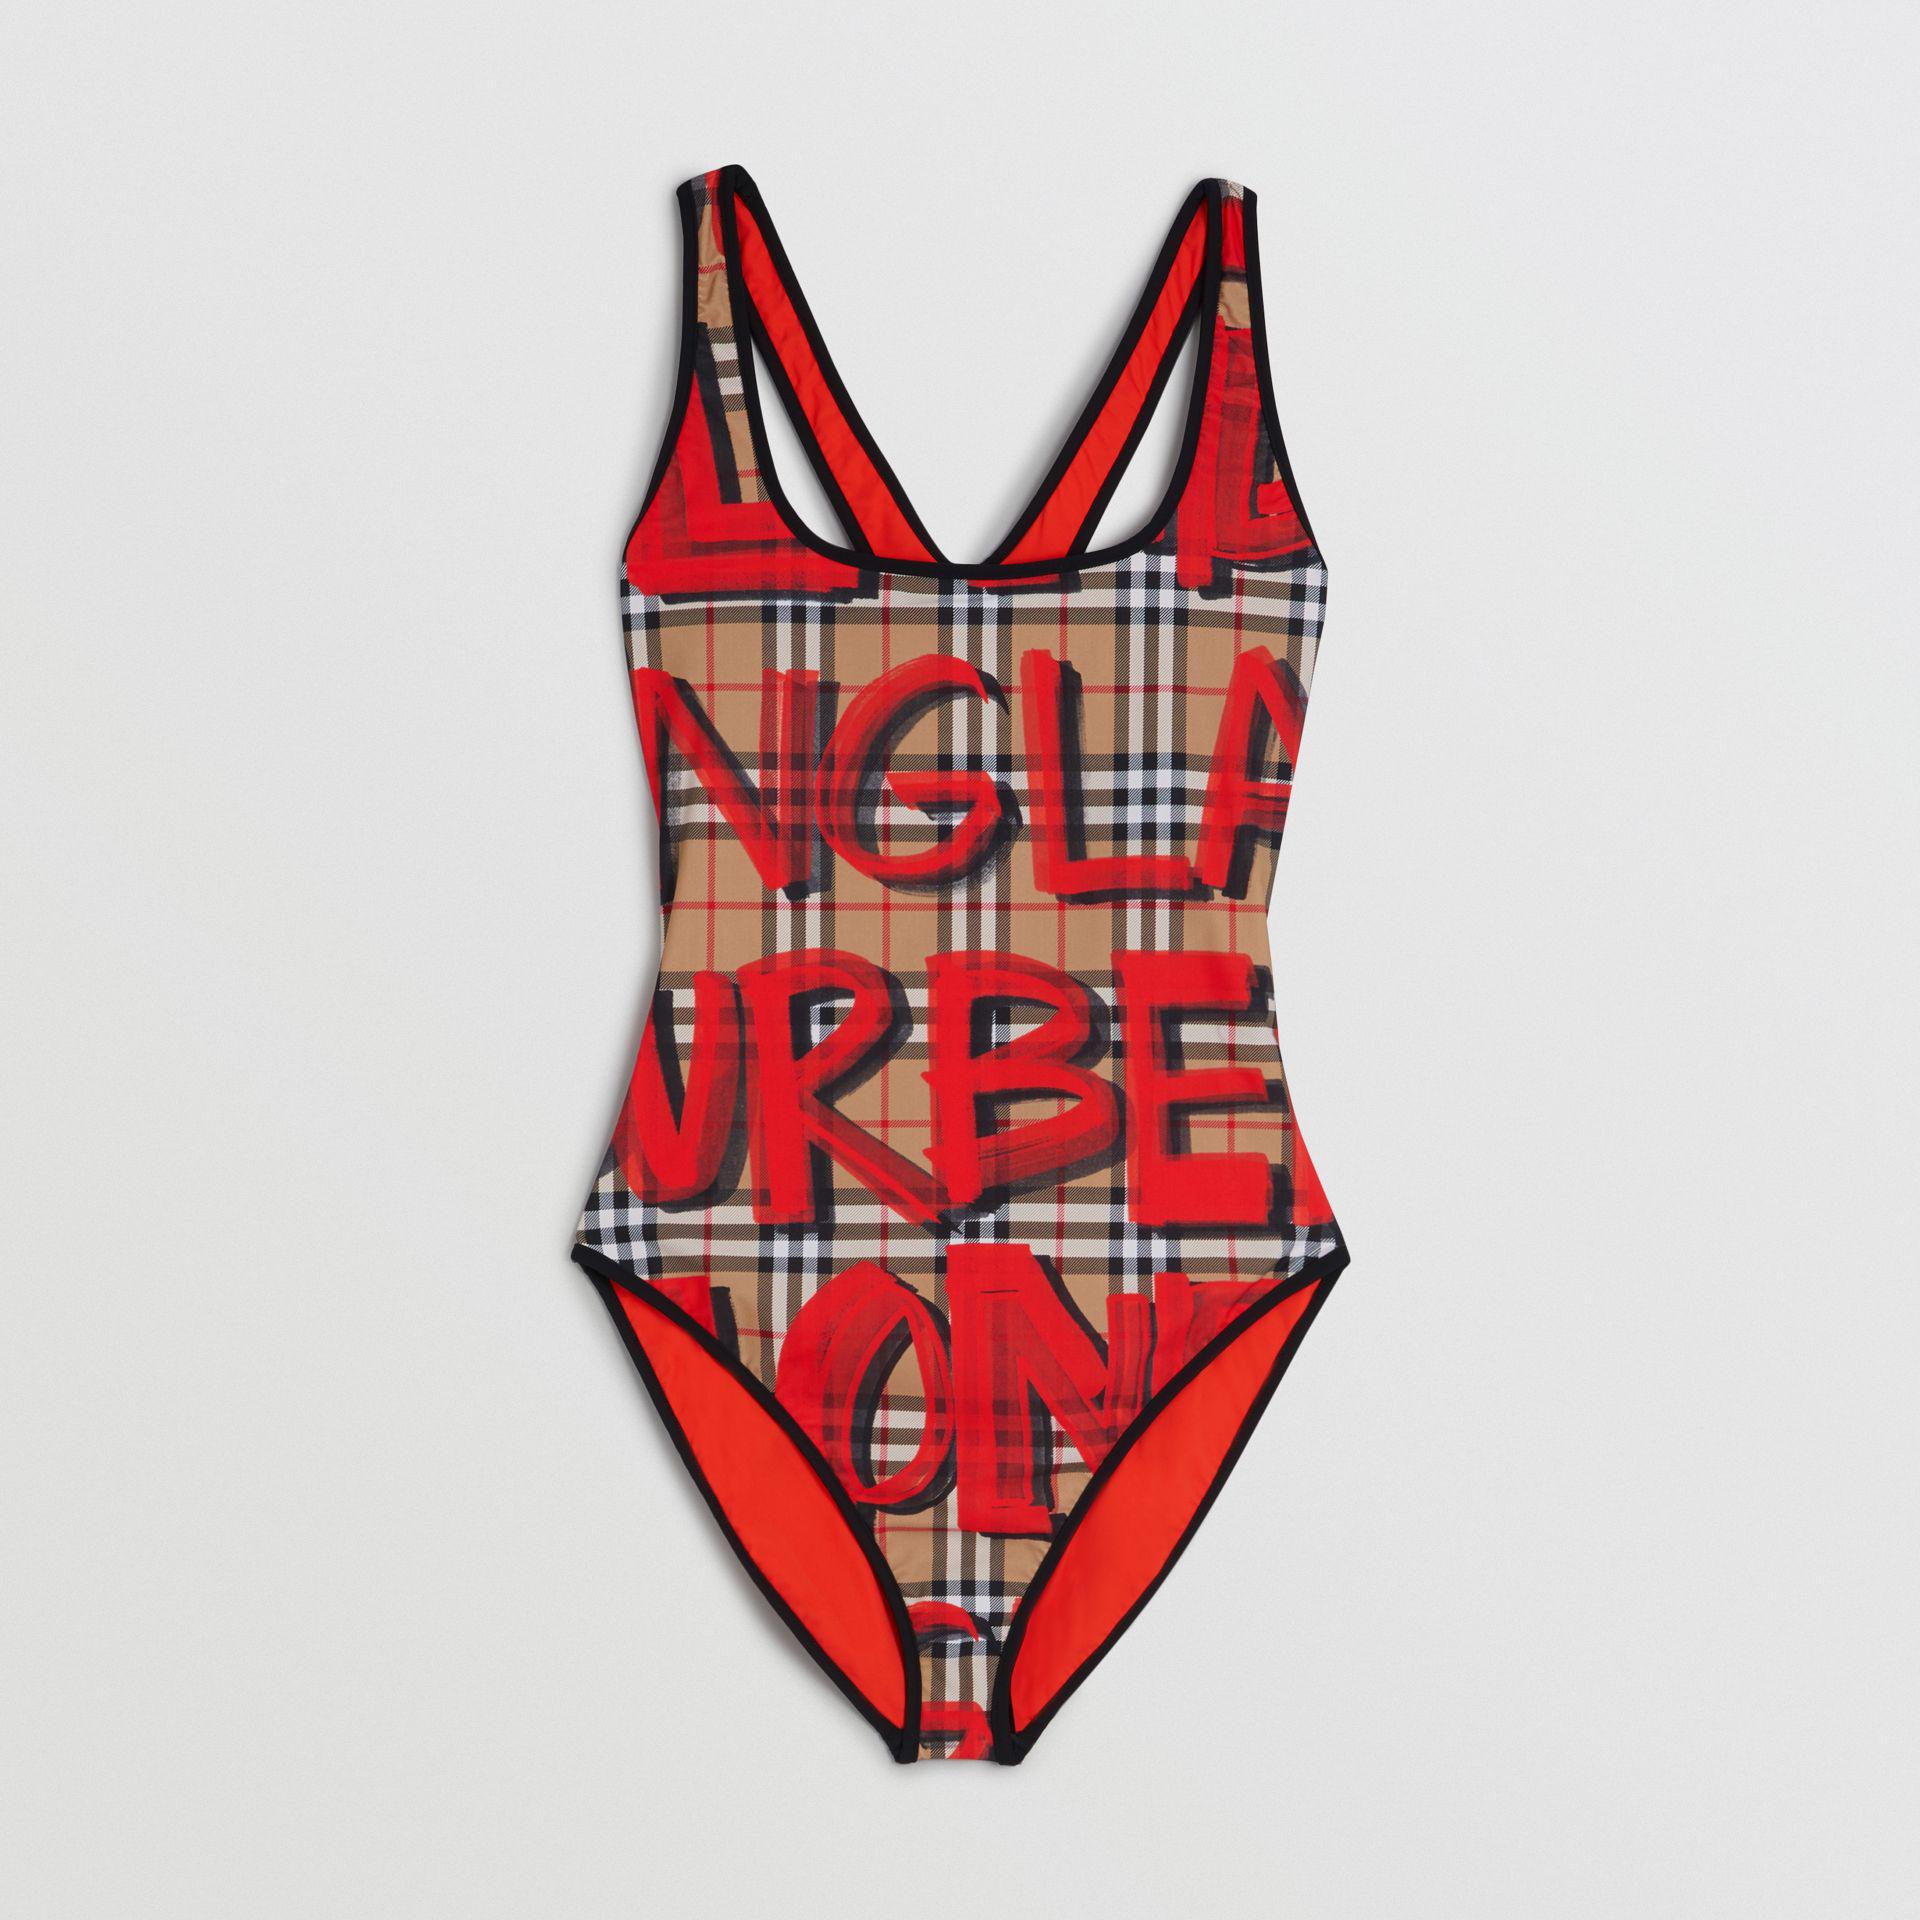 burberry bathing suits womens